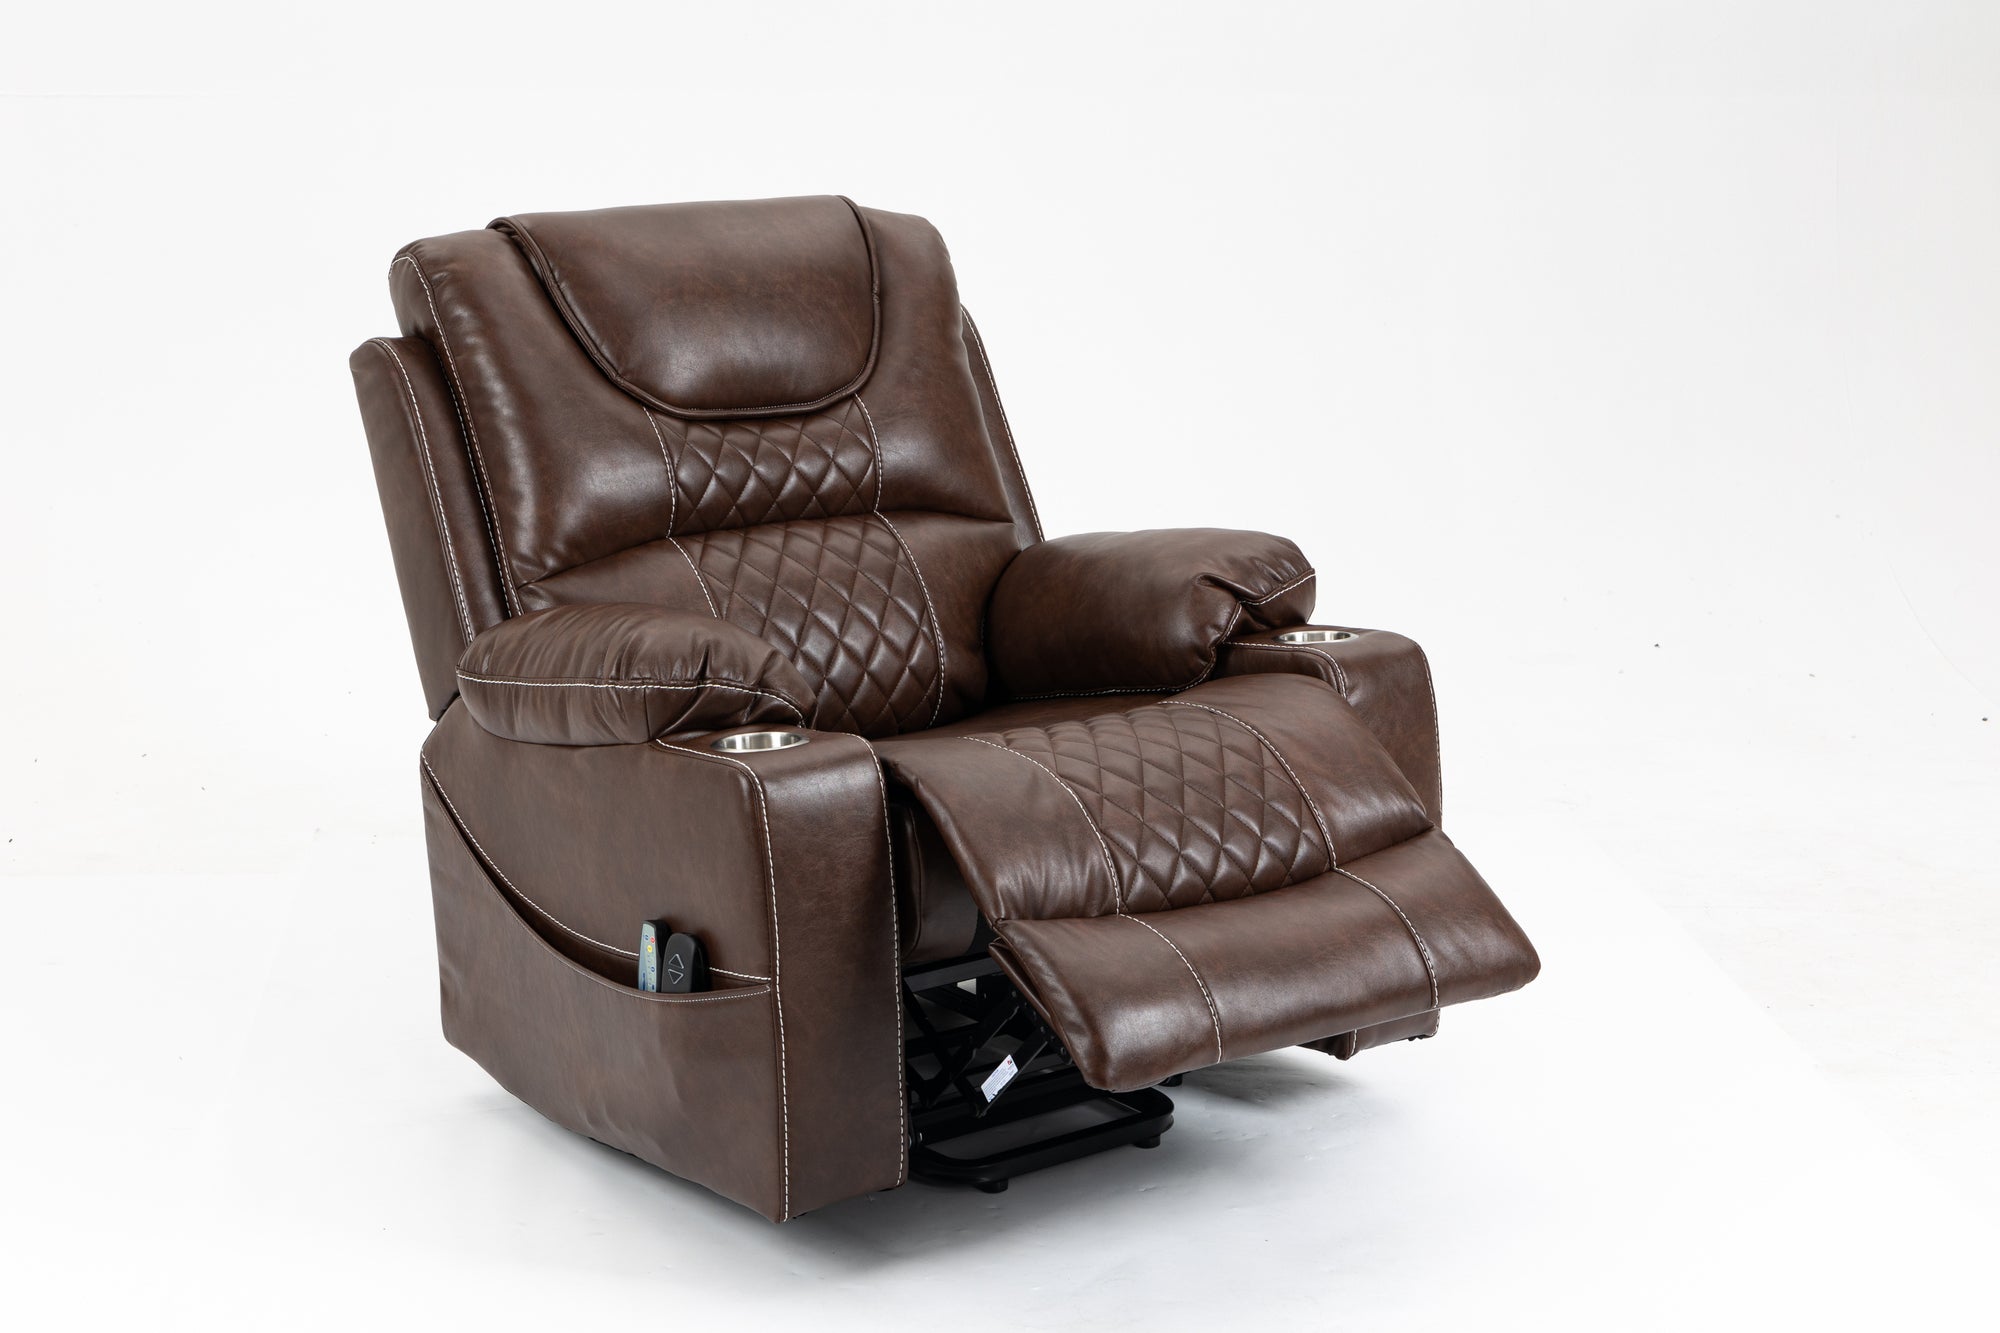 Leather Power Lift Recliner Chair with Massage and Lay Flat Capacity